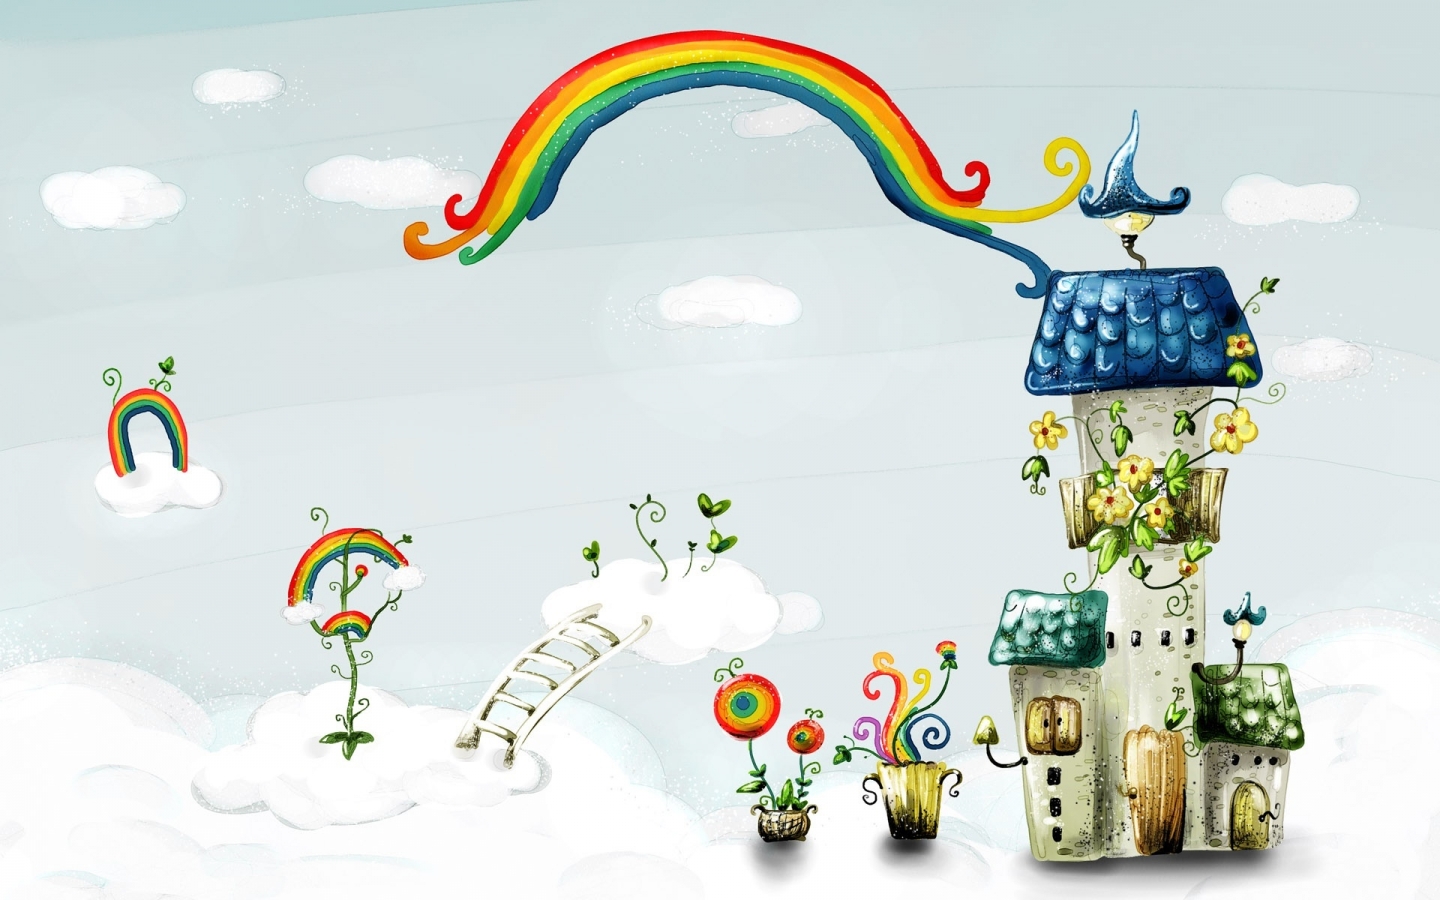 Rainbow and House for 1440 x 900 widescreen resolution